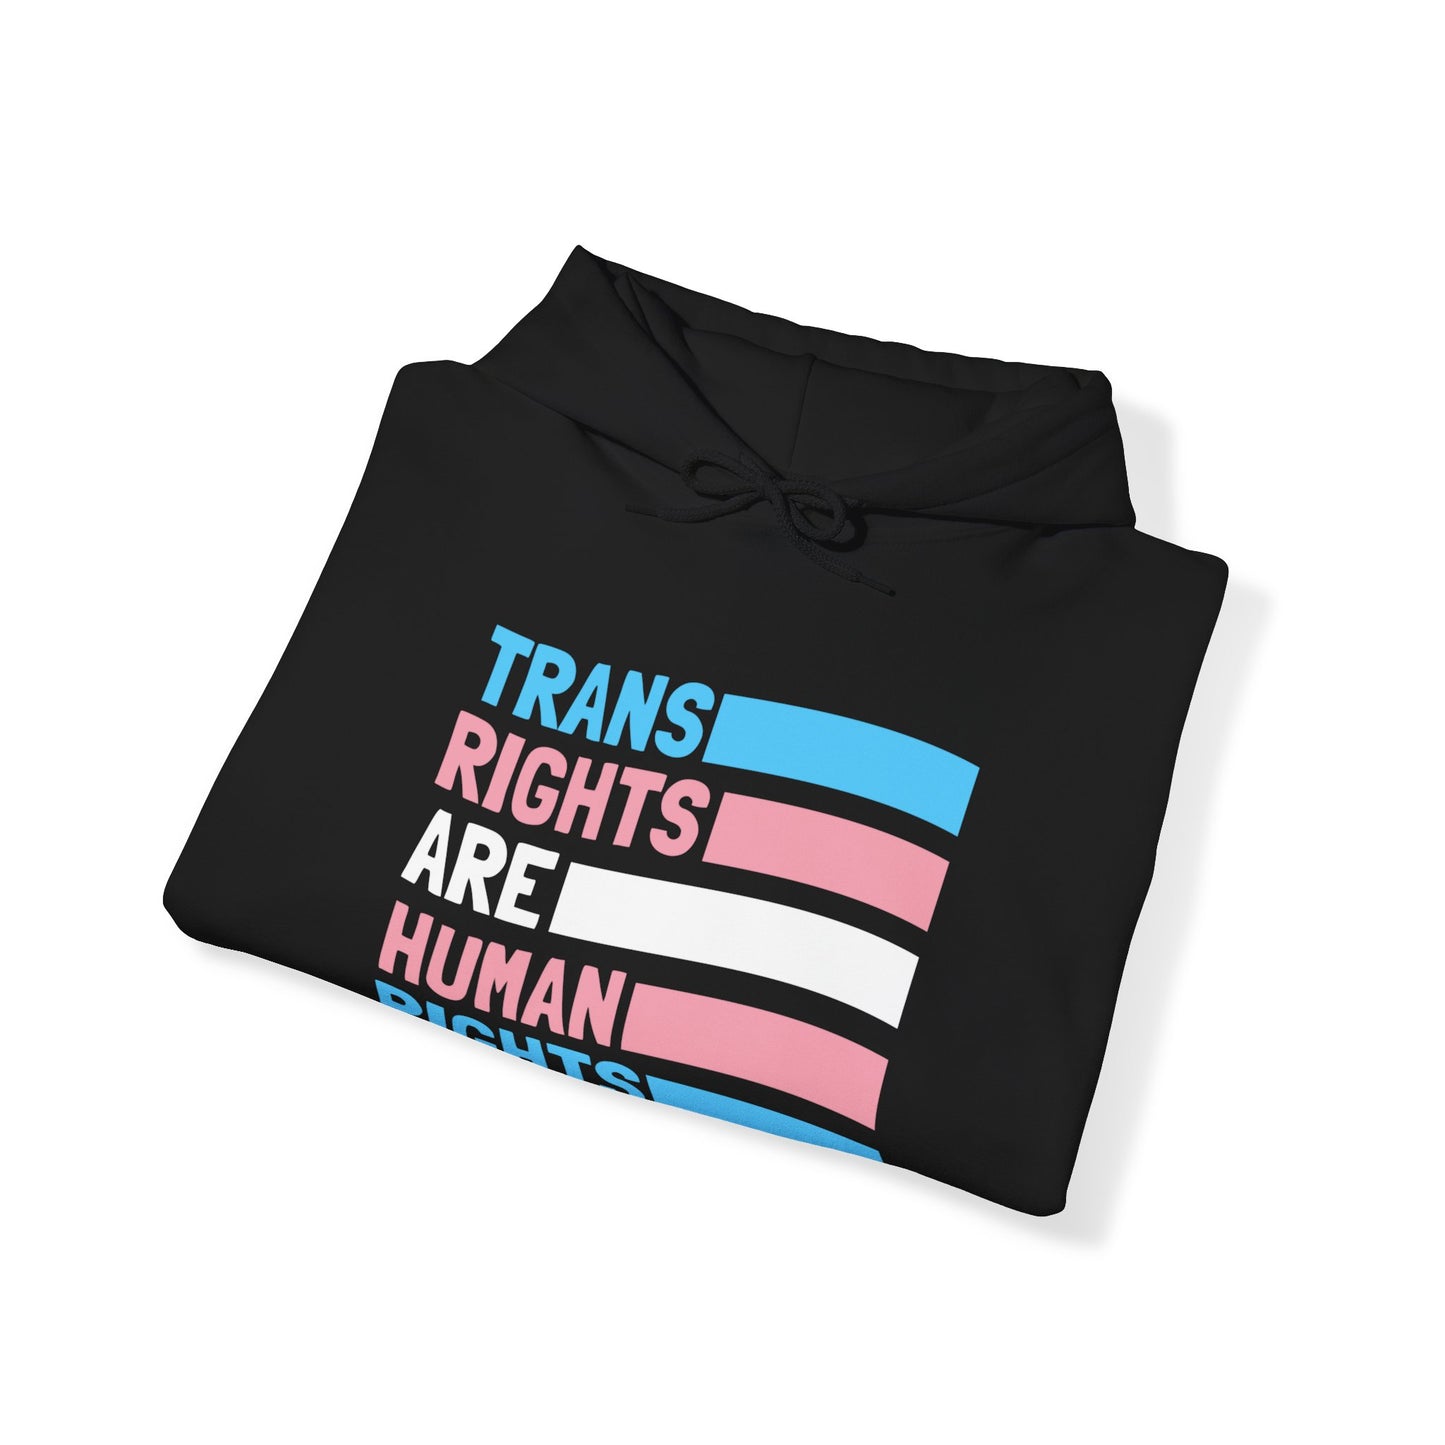 “Trans Rights Are Human Rights” Unisex Hoodie